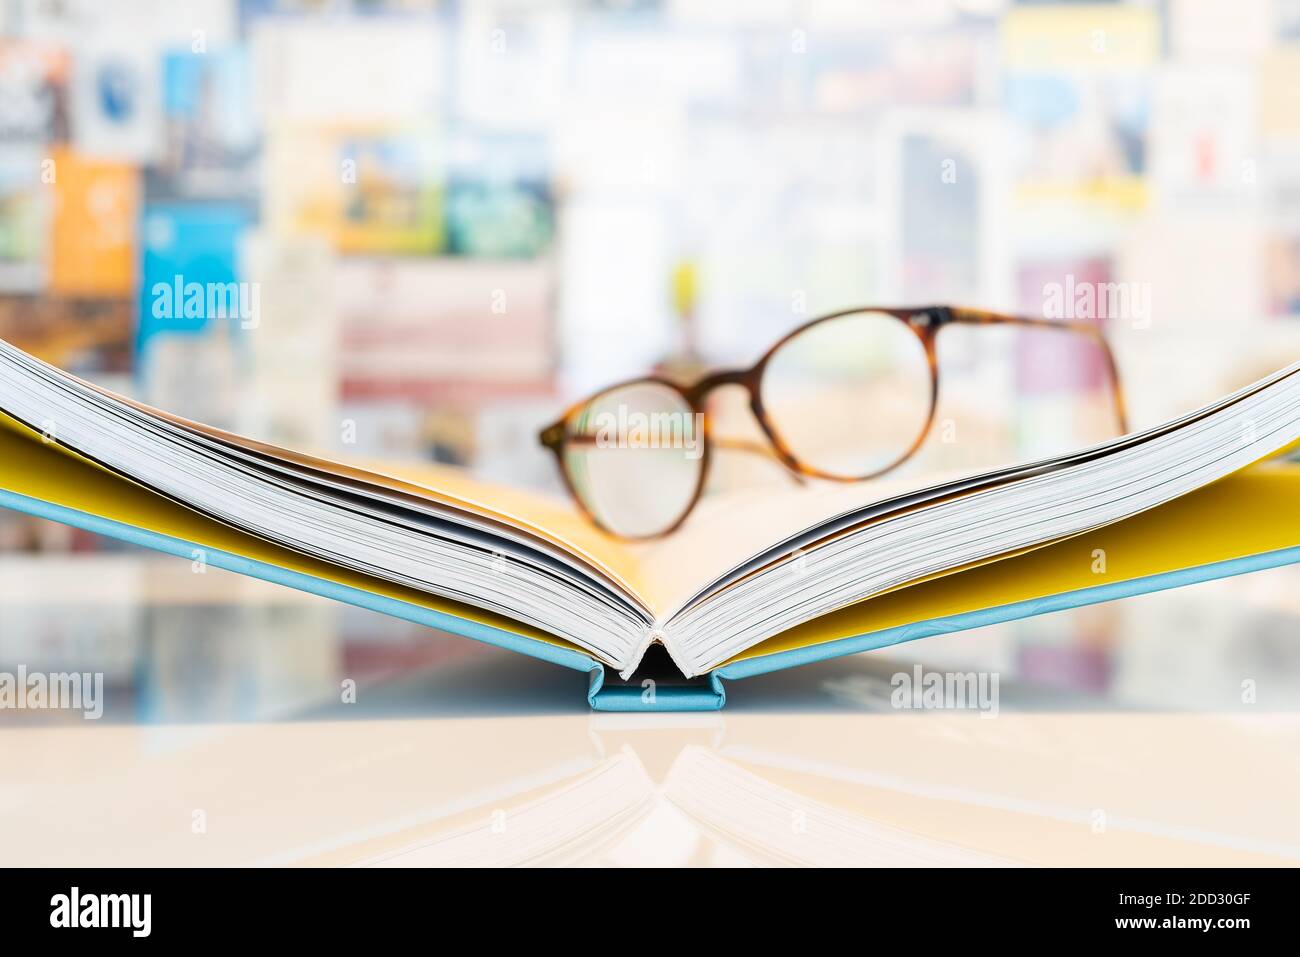 Open book with soft blurred reading glasses in background Stock Photo